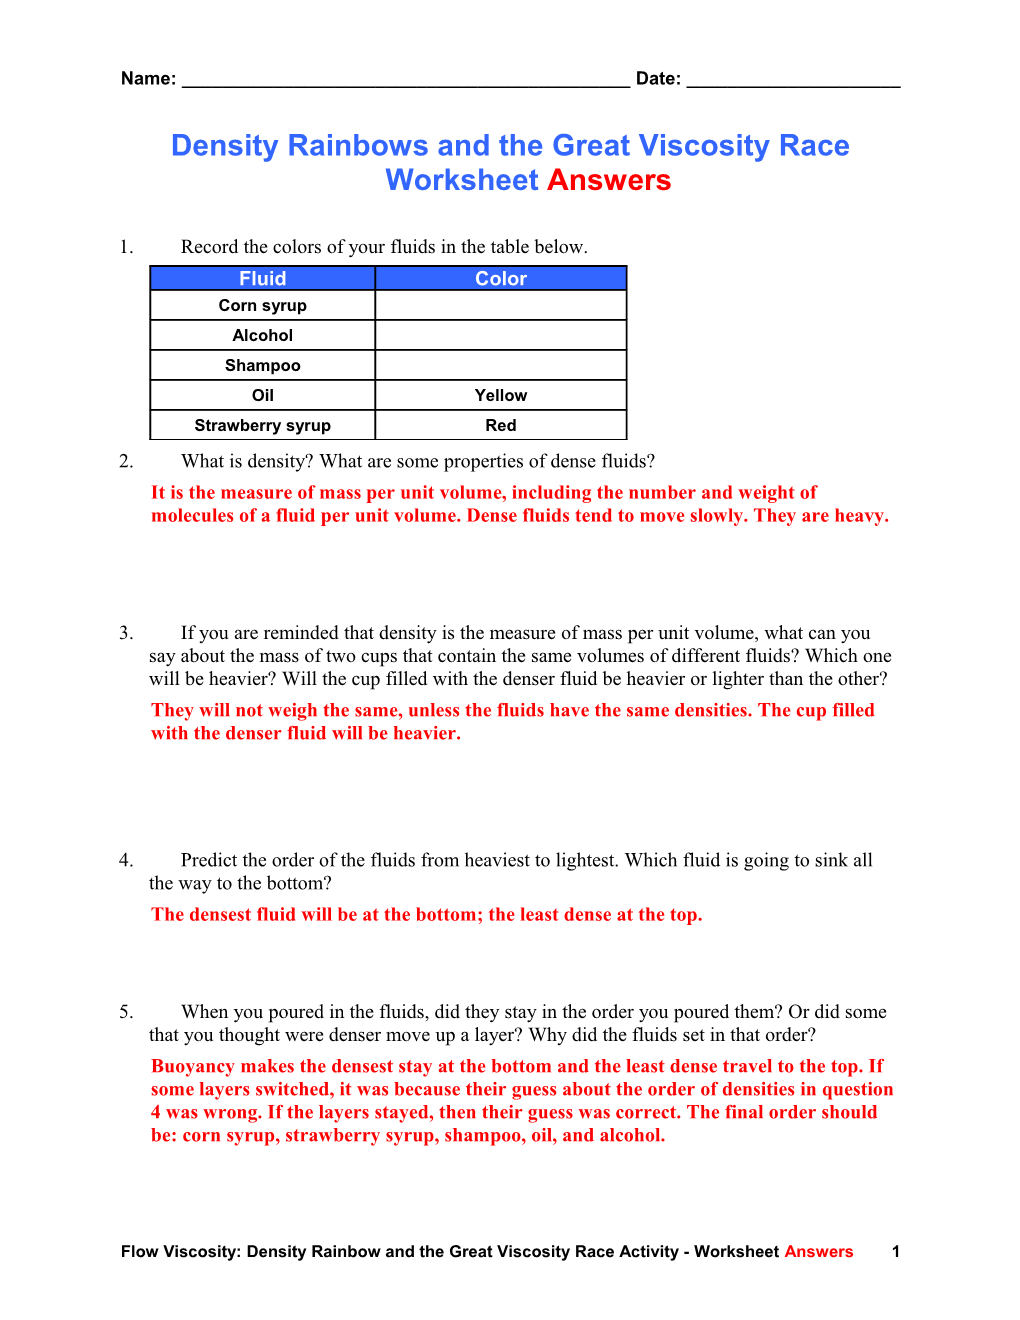 Density Rainbows and the Great Viscosity Race Worksheet Answers